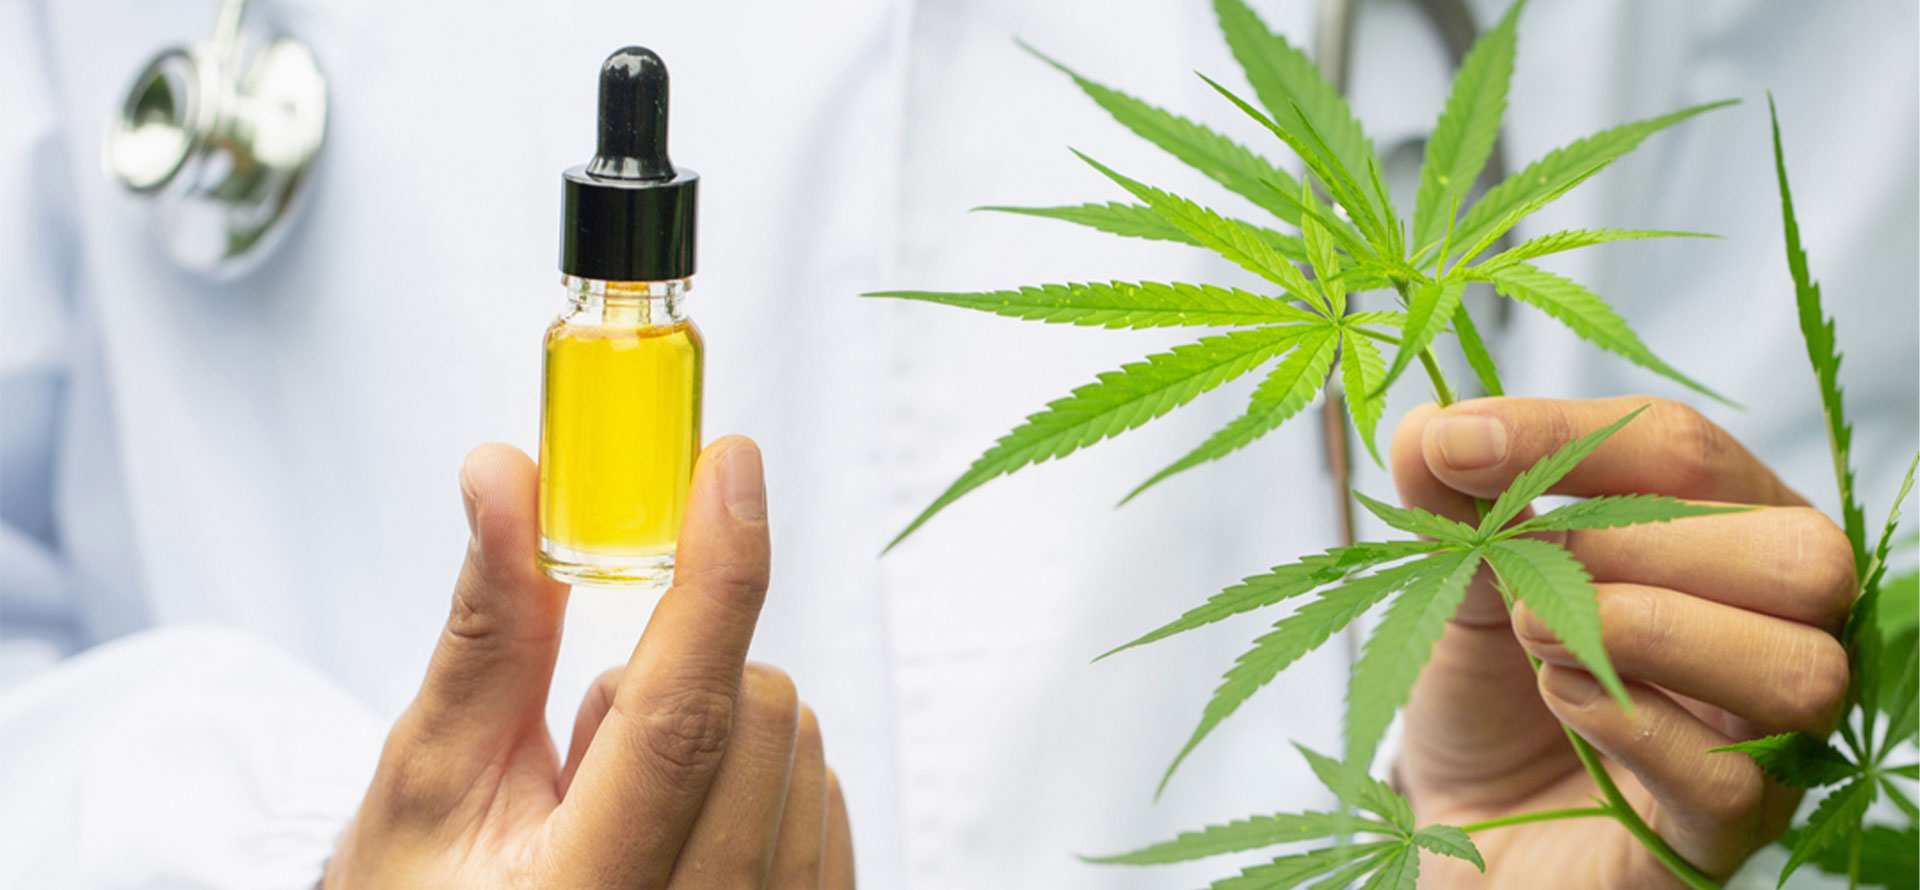 Cbd oil for candida and doctor.